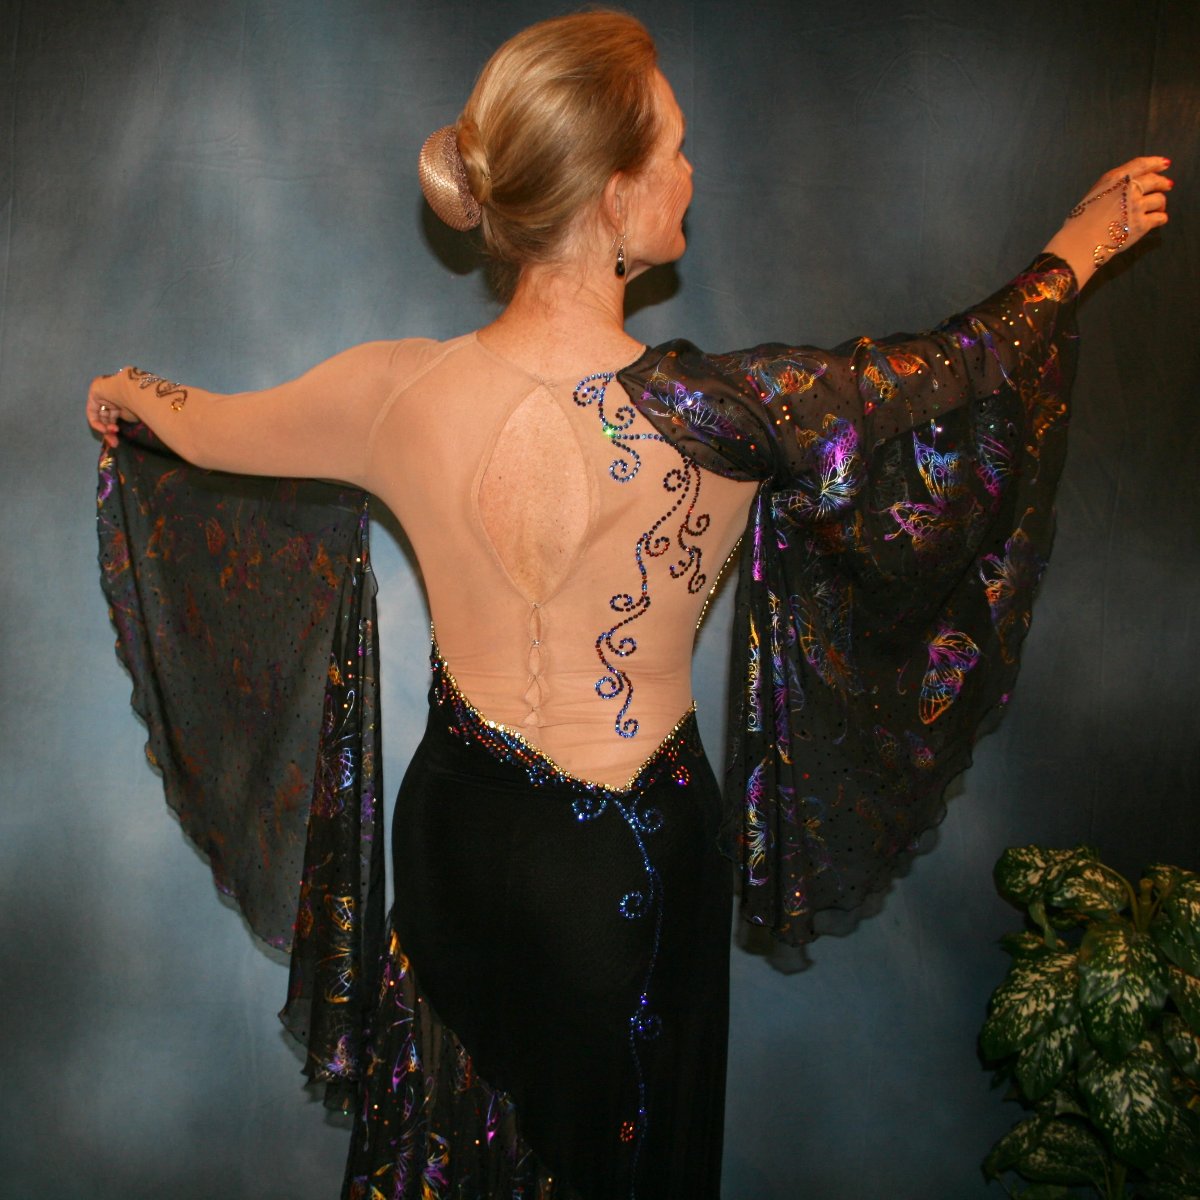 upper back view of Black tango dress created of black luxurious solid slinky artistically patterned out on a nude illusion base, this dramatic dress design features hologram butterfly print flounces & floats. Crystal Meridian Blue Swarovski rhinestones embellish in detail to finish.